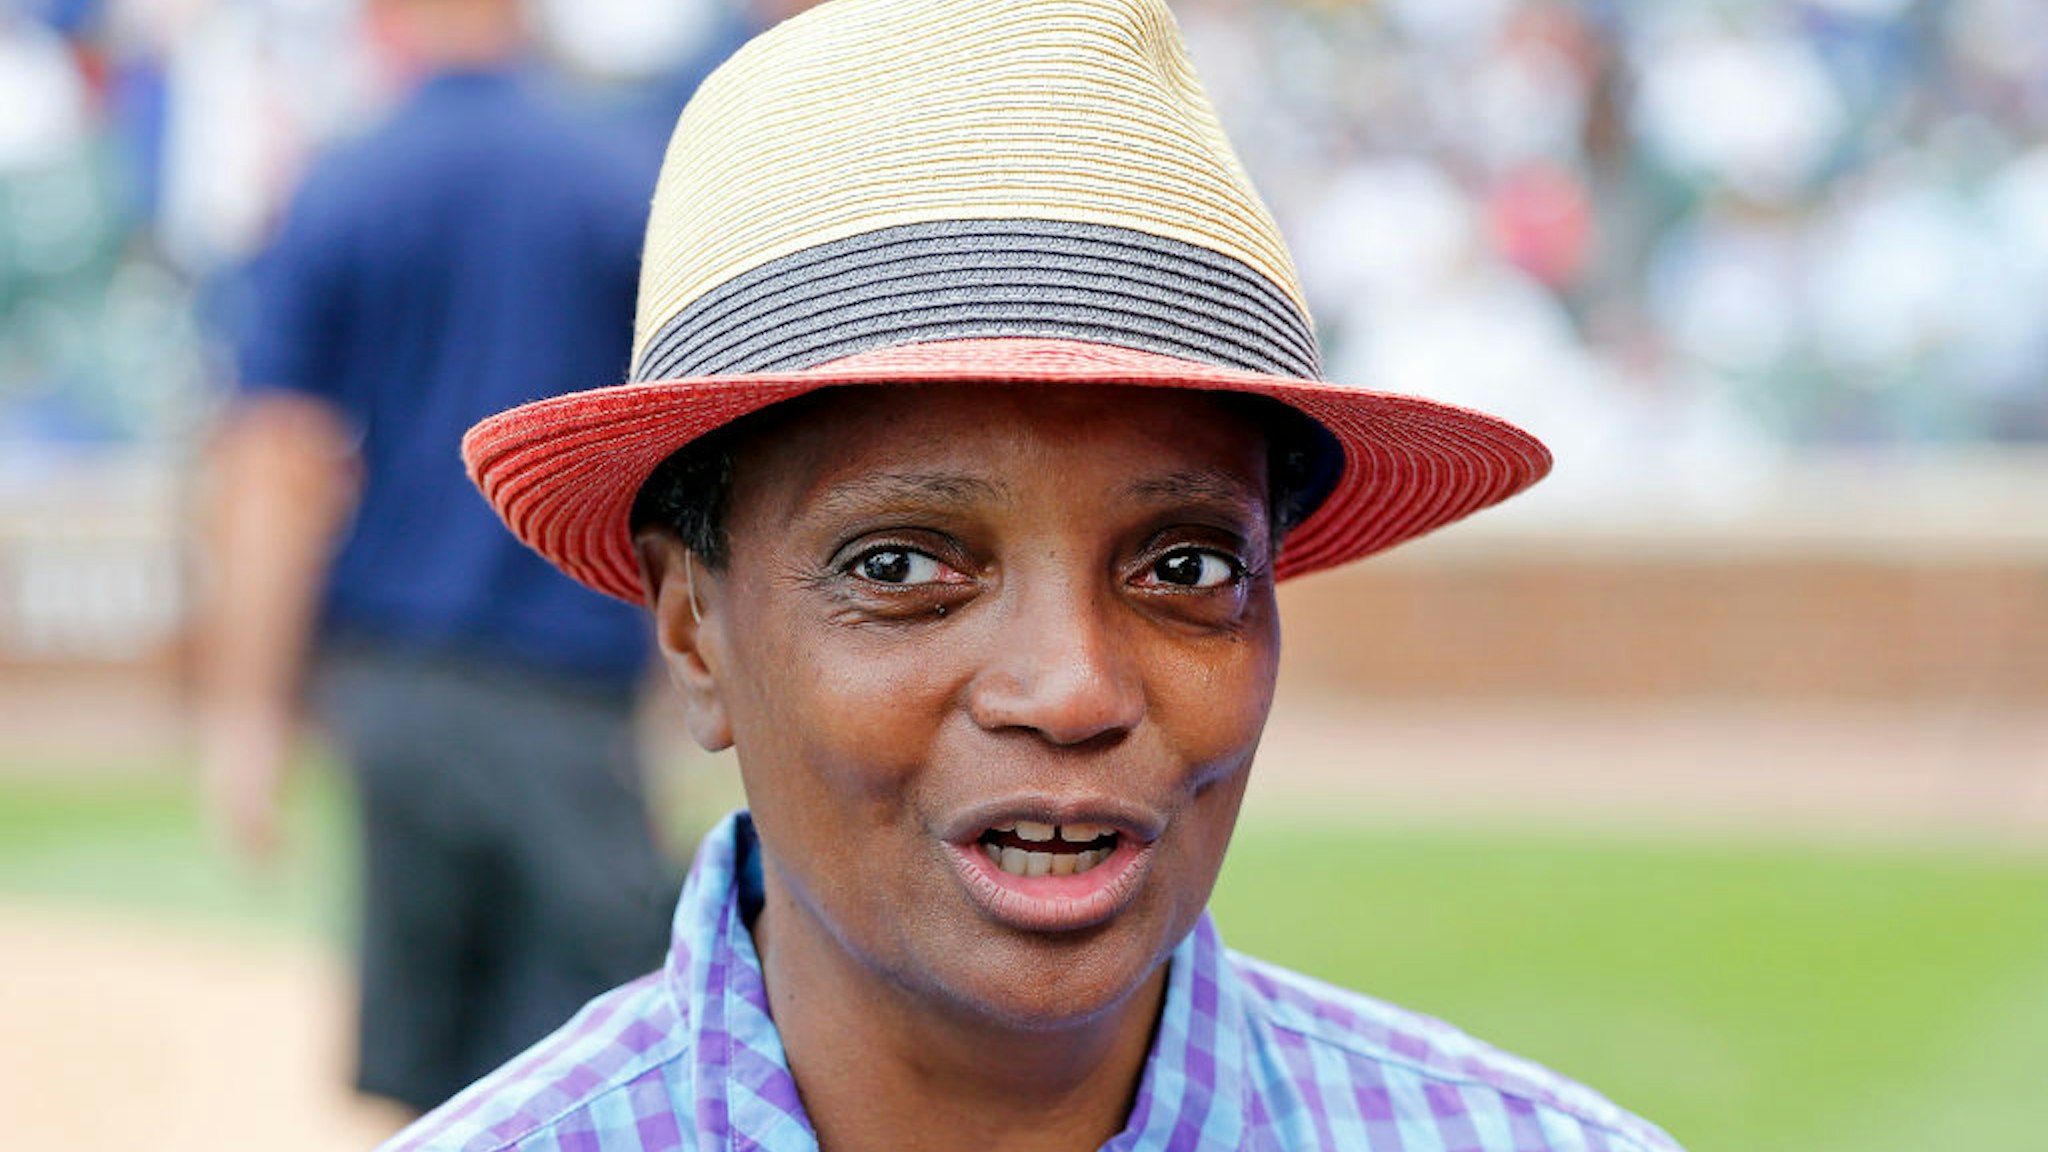 Chicago mayor Lori Lightfoot stands on the field during a ceremony honoring Lee Smith's induction into the Baseball Hall of Fame prior to a game between the Chicago Cubs and the Milwaukee Brewers at Wrigley Field on September 01, 2019 in Chicago, Illinois.